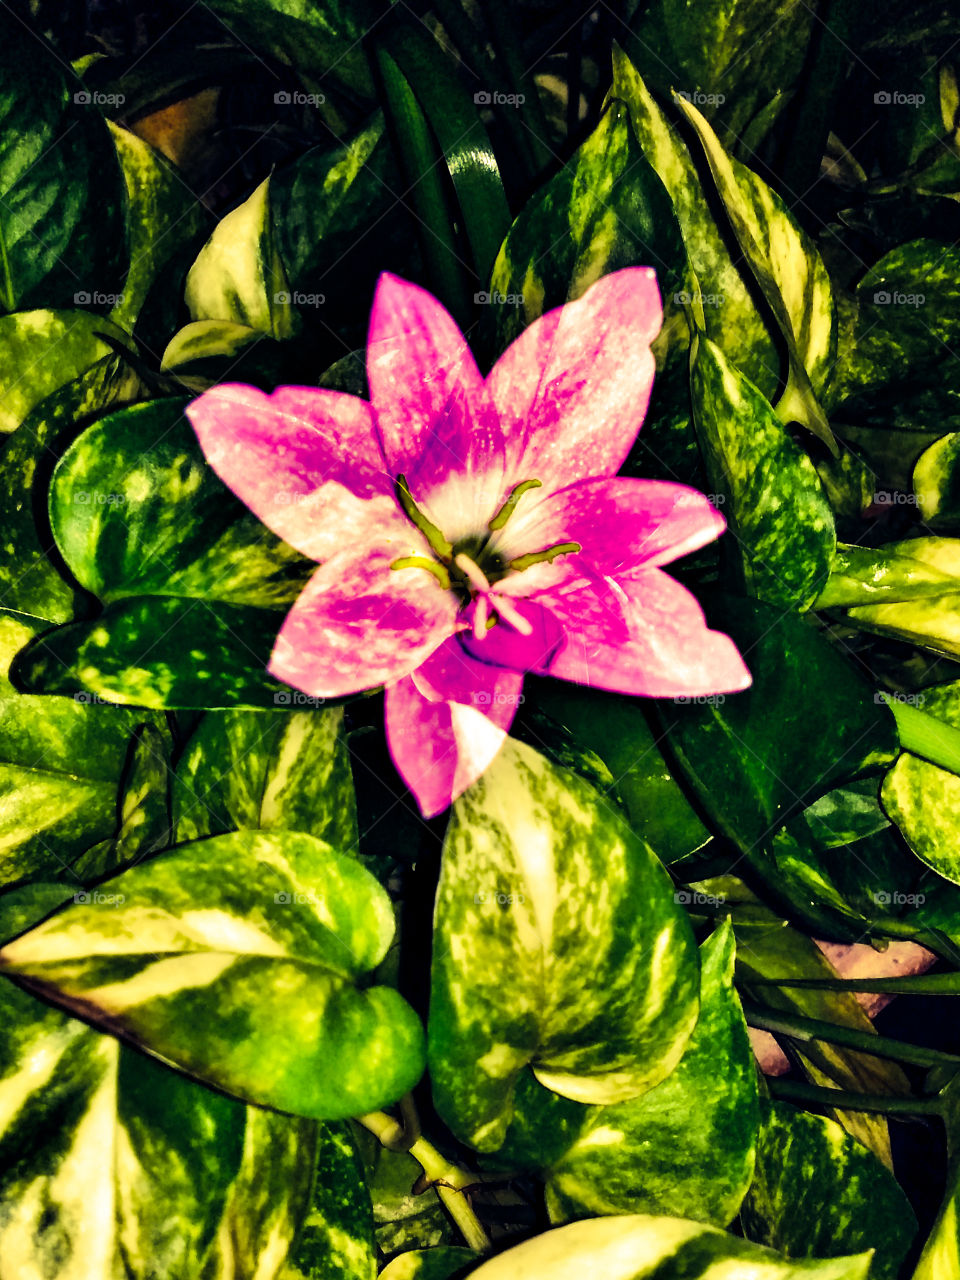 Title-There are moments in life when you see the World anew
Description- Image of a pink flower captured in the morning.
Location-West Bengal,India